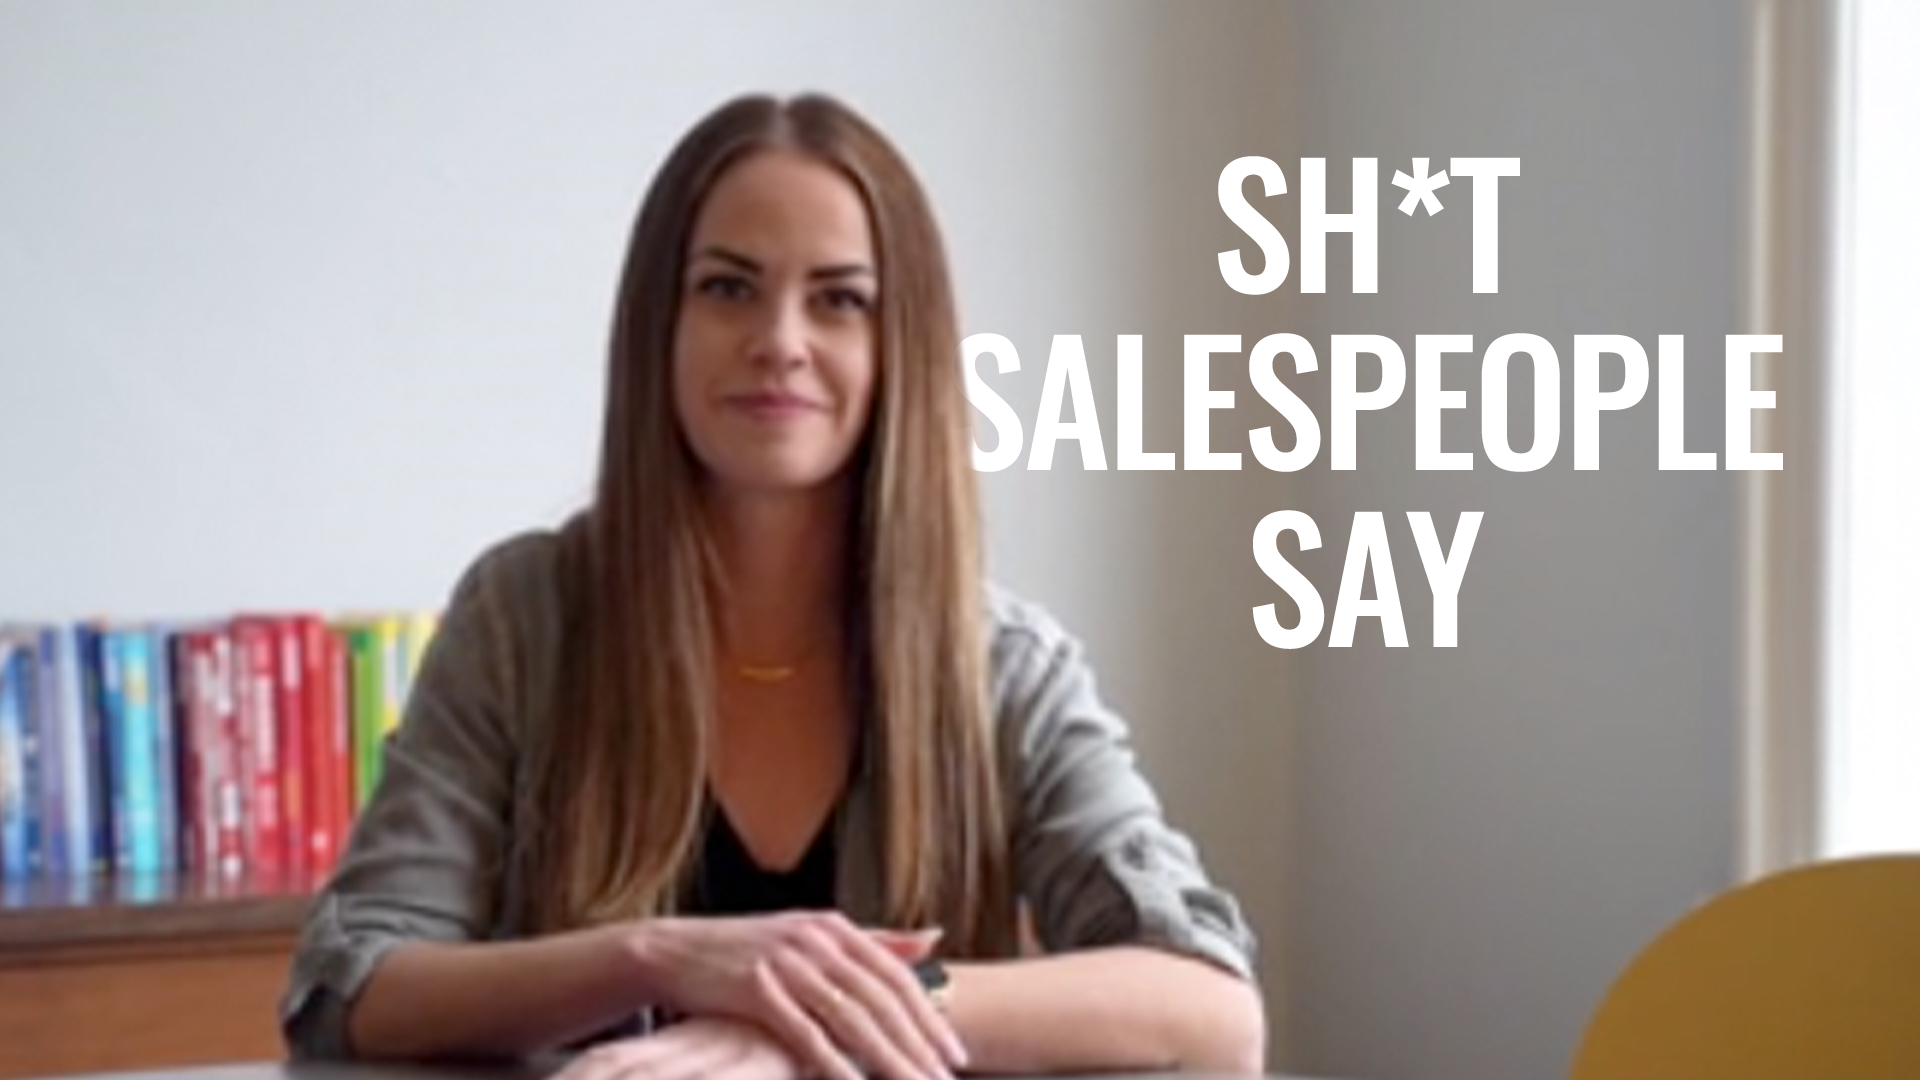 Sh*t Salespeople Say